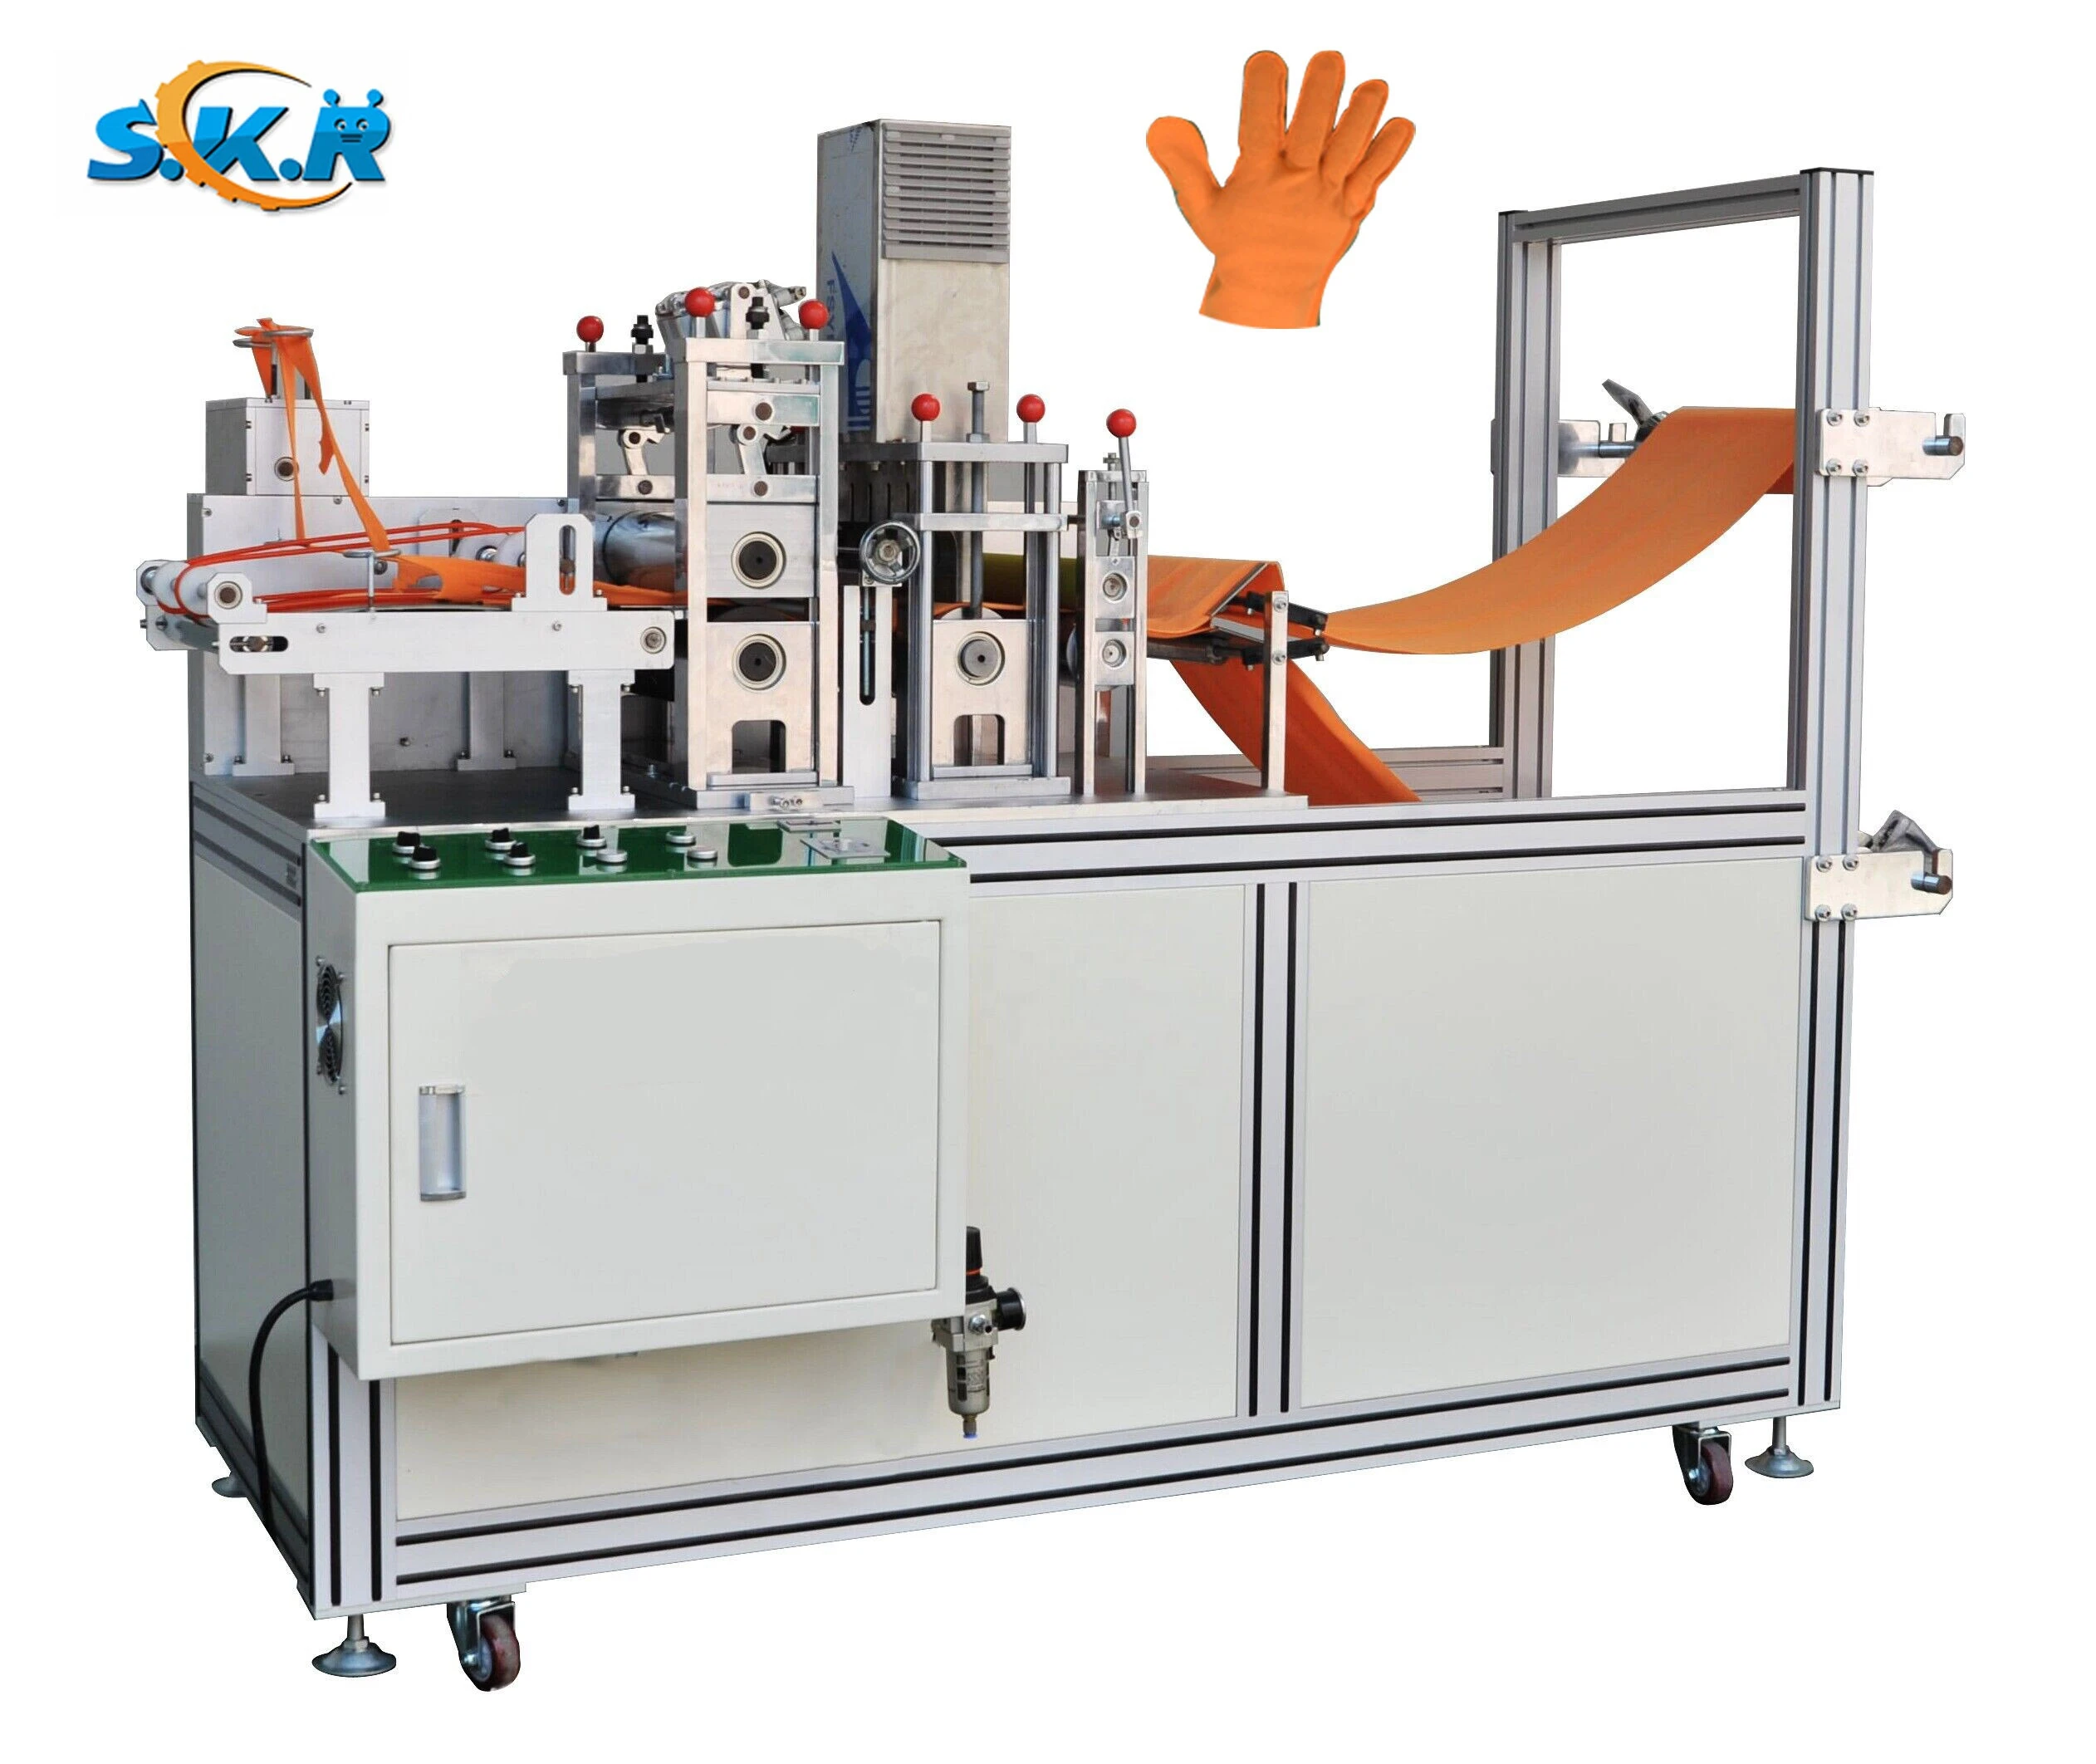 Scara Robot Supply Surgical Gloves Made in China